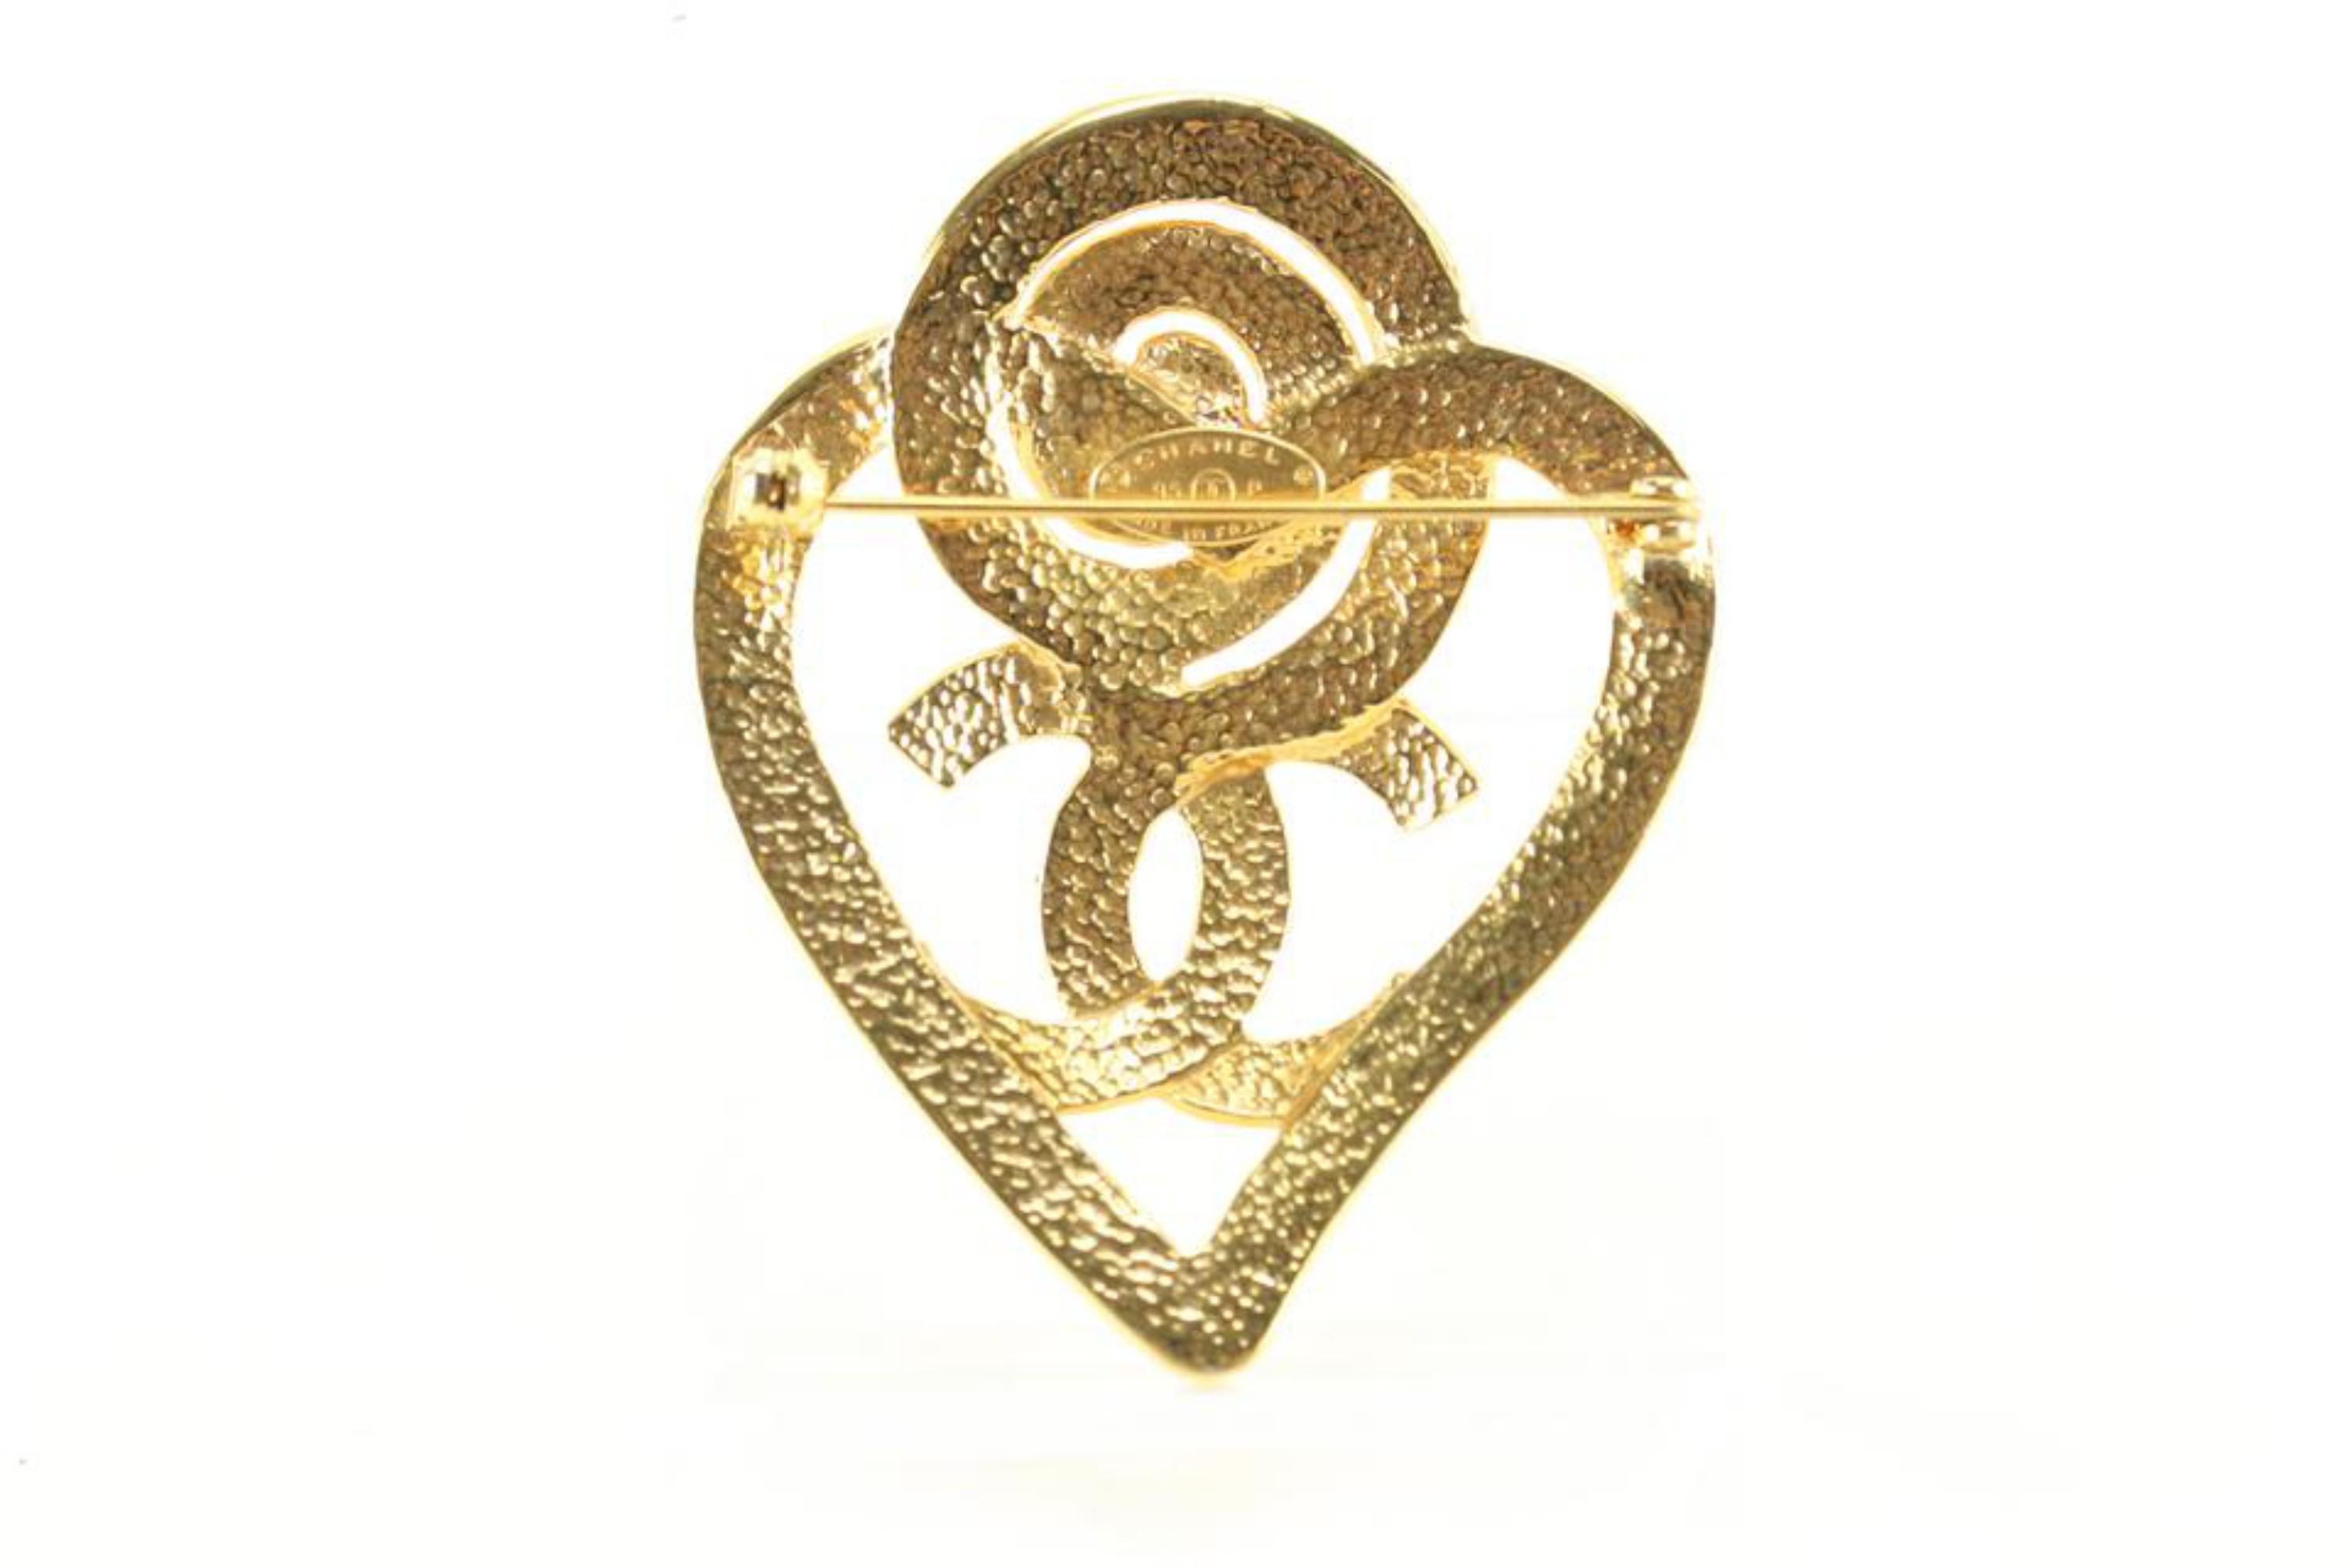 Chanel 95p Spiral Heart CC Brooch Pin Corsage 29ck824s For Sale 4